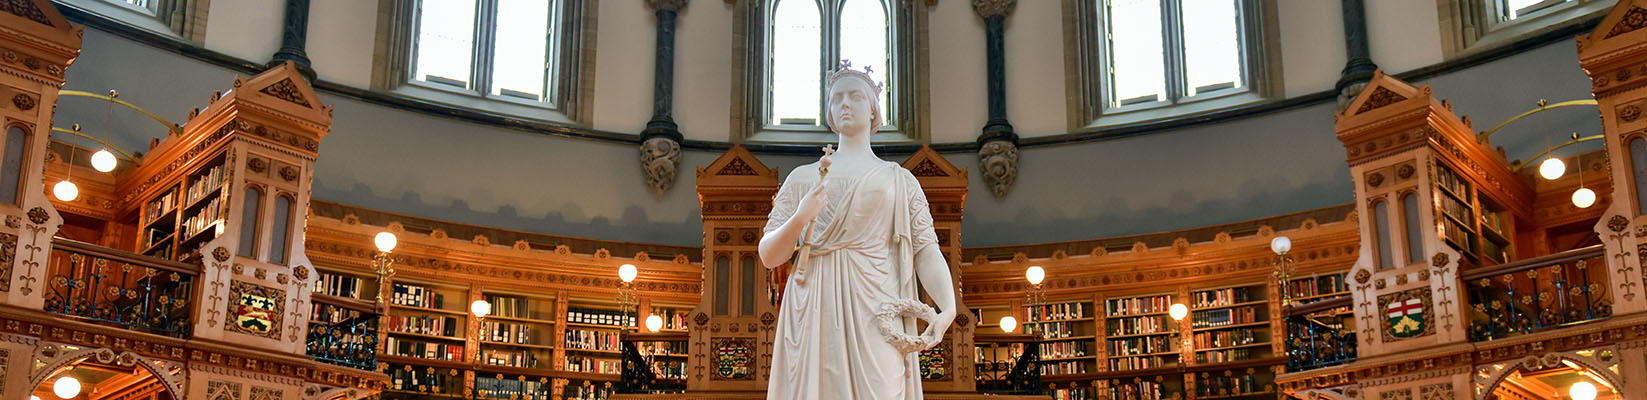 Queen Victoria in the Main Reading Room